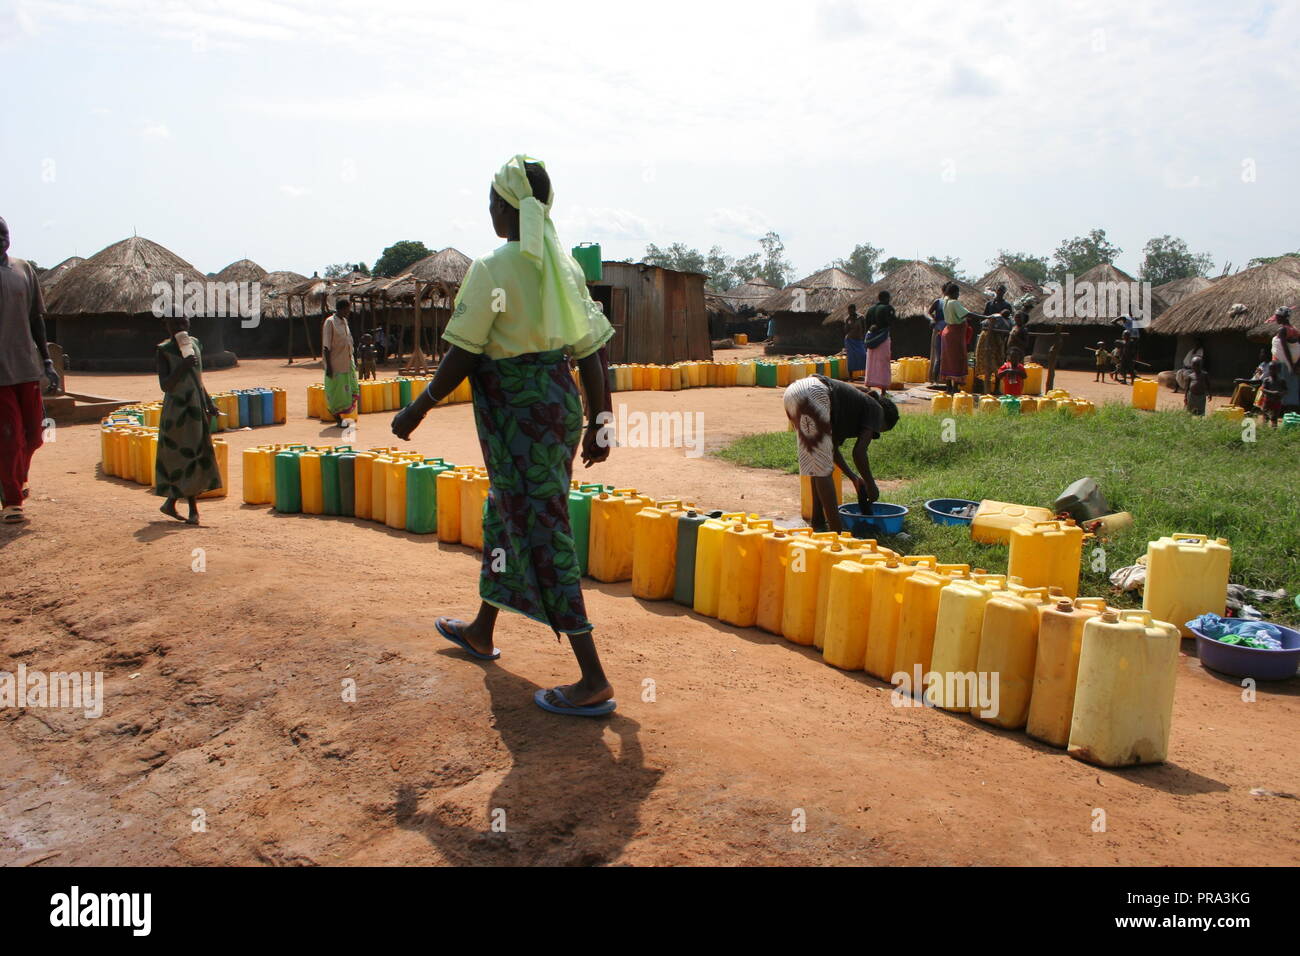 A long line of jerrycans wait to be filled at a single water borehole in Atiak internally displaced people's (IDP) camp, Northern Uganda. Stock Photo